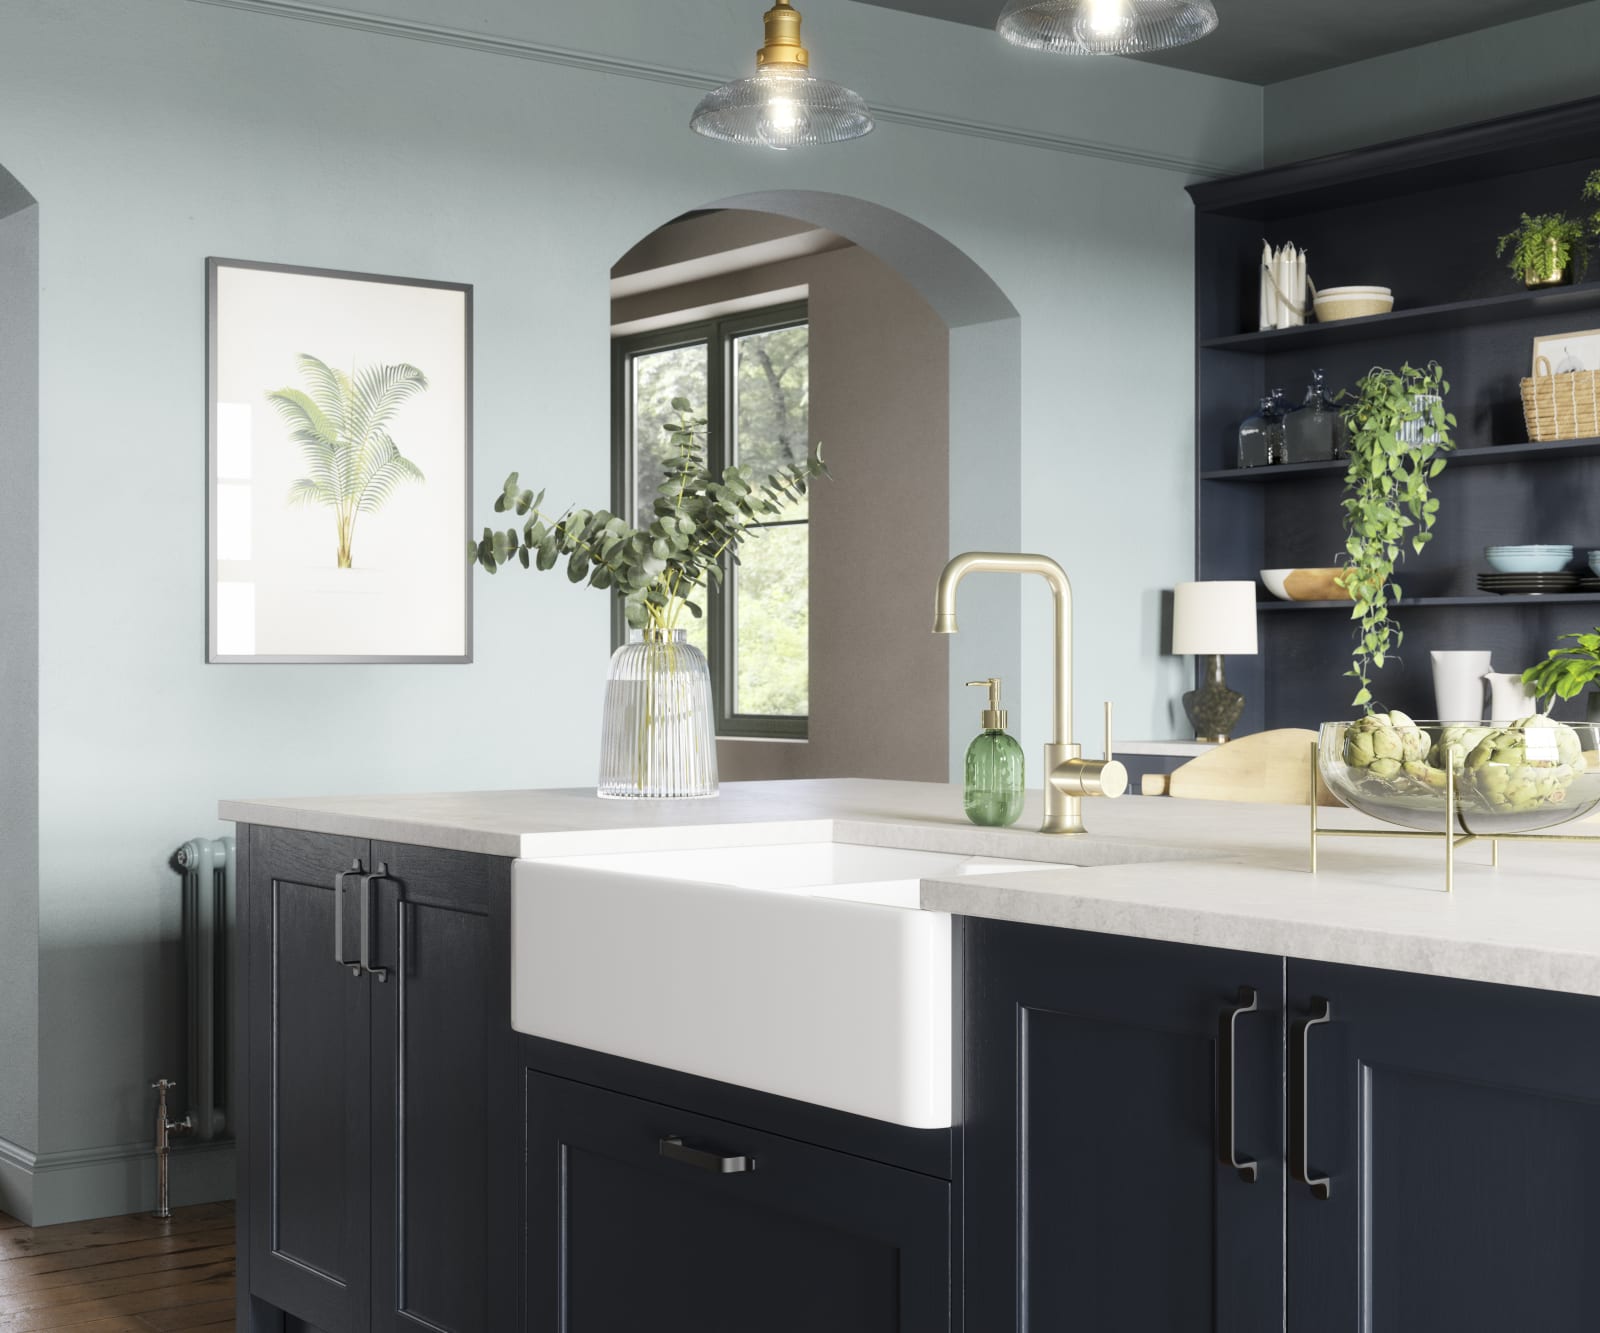 Modern country-style kitchen island with Shaker door Ludlow in dark blue shade Midnight, a porcelain sink, marbled worktop, brass tap and open shelves in matching blue.